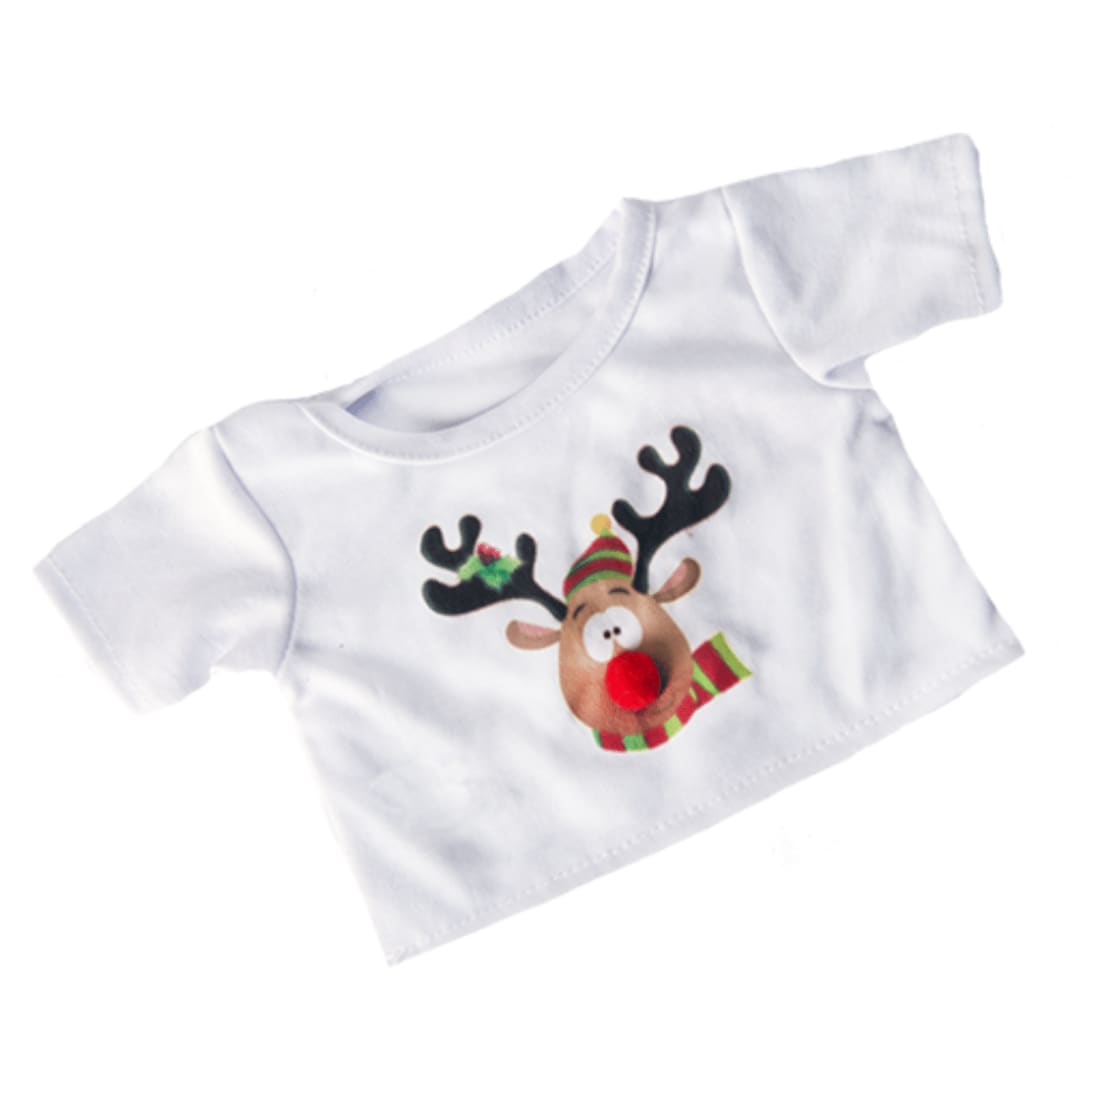 Shh! Surprise tee shirt gift for Christmas Dinosaur with reindeer.